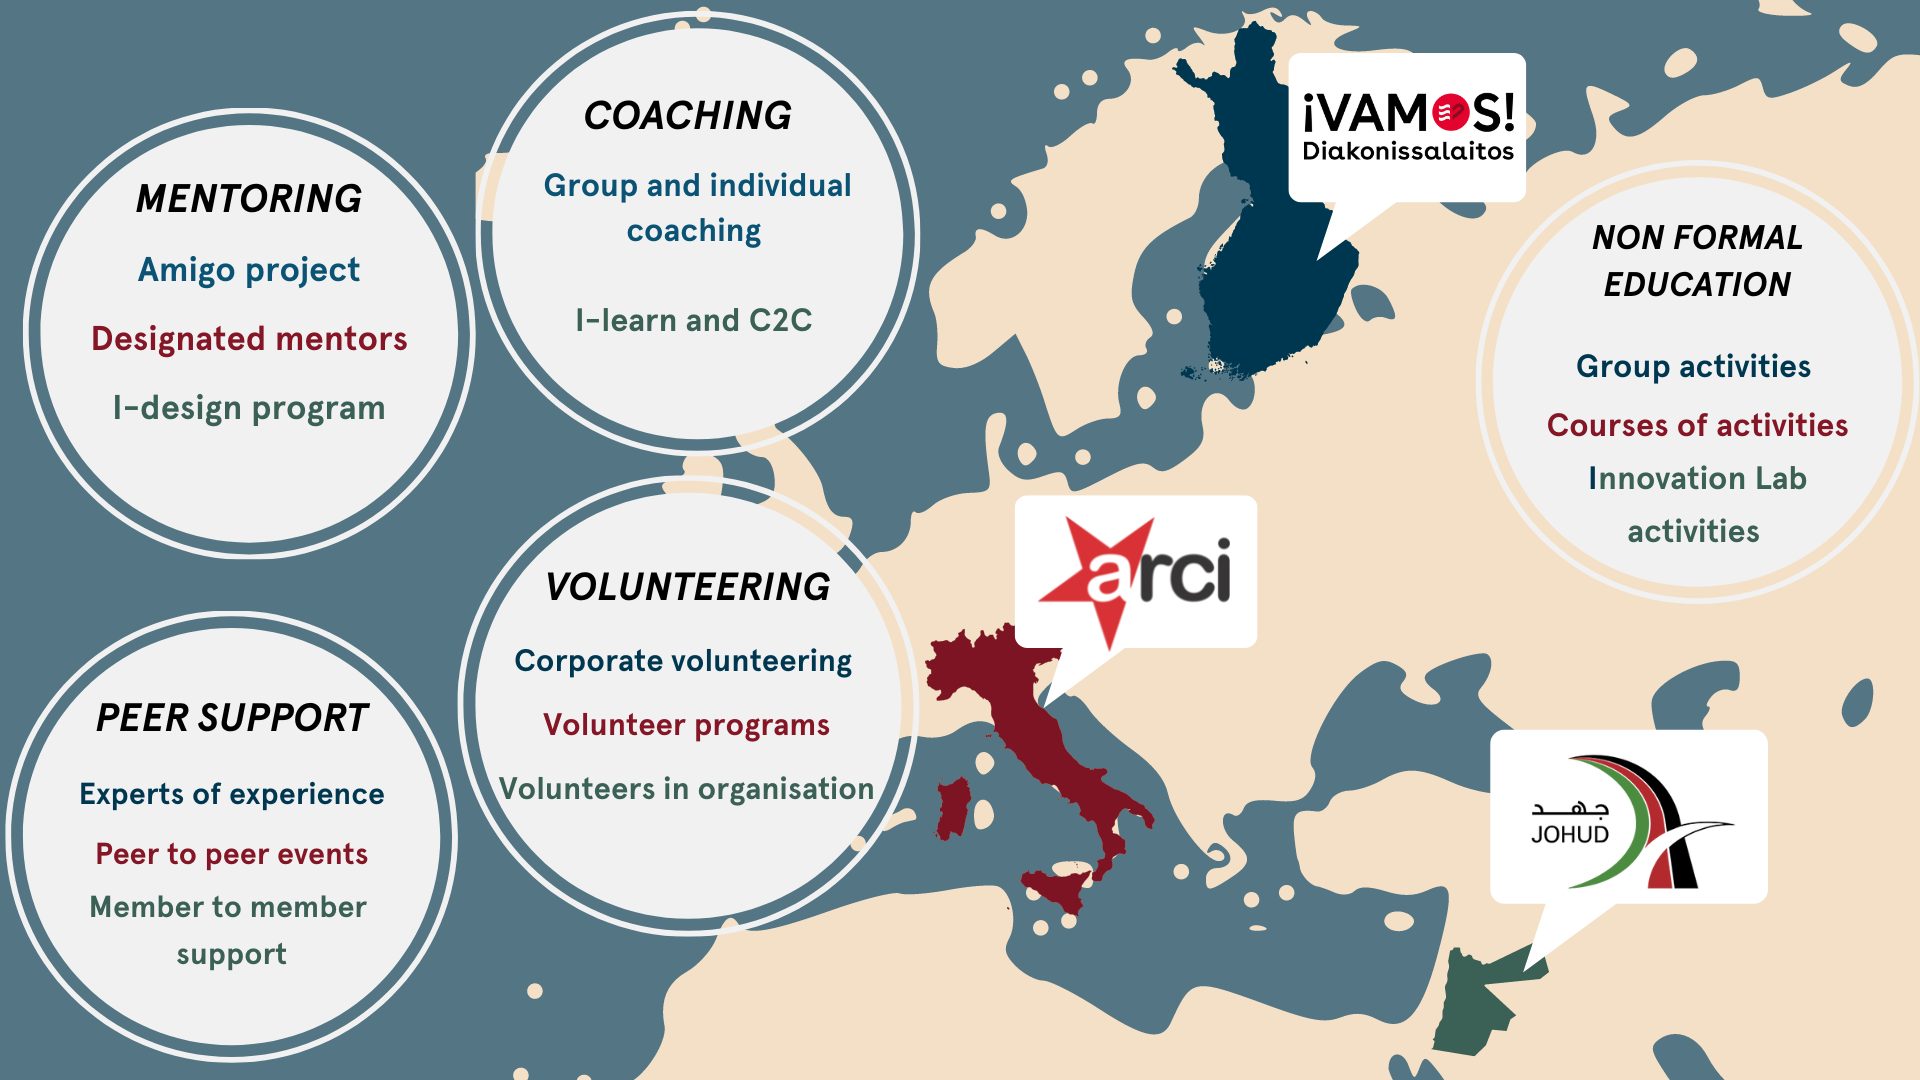 A map that highlights Vamos Finland, JOHUD Jordan and ARCI Italy. The map describes good practices of following themes: volunteering, mentoring, peer support, coaching and non formal education.